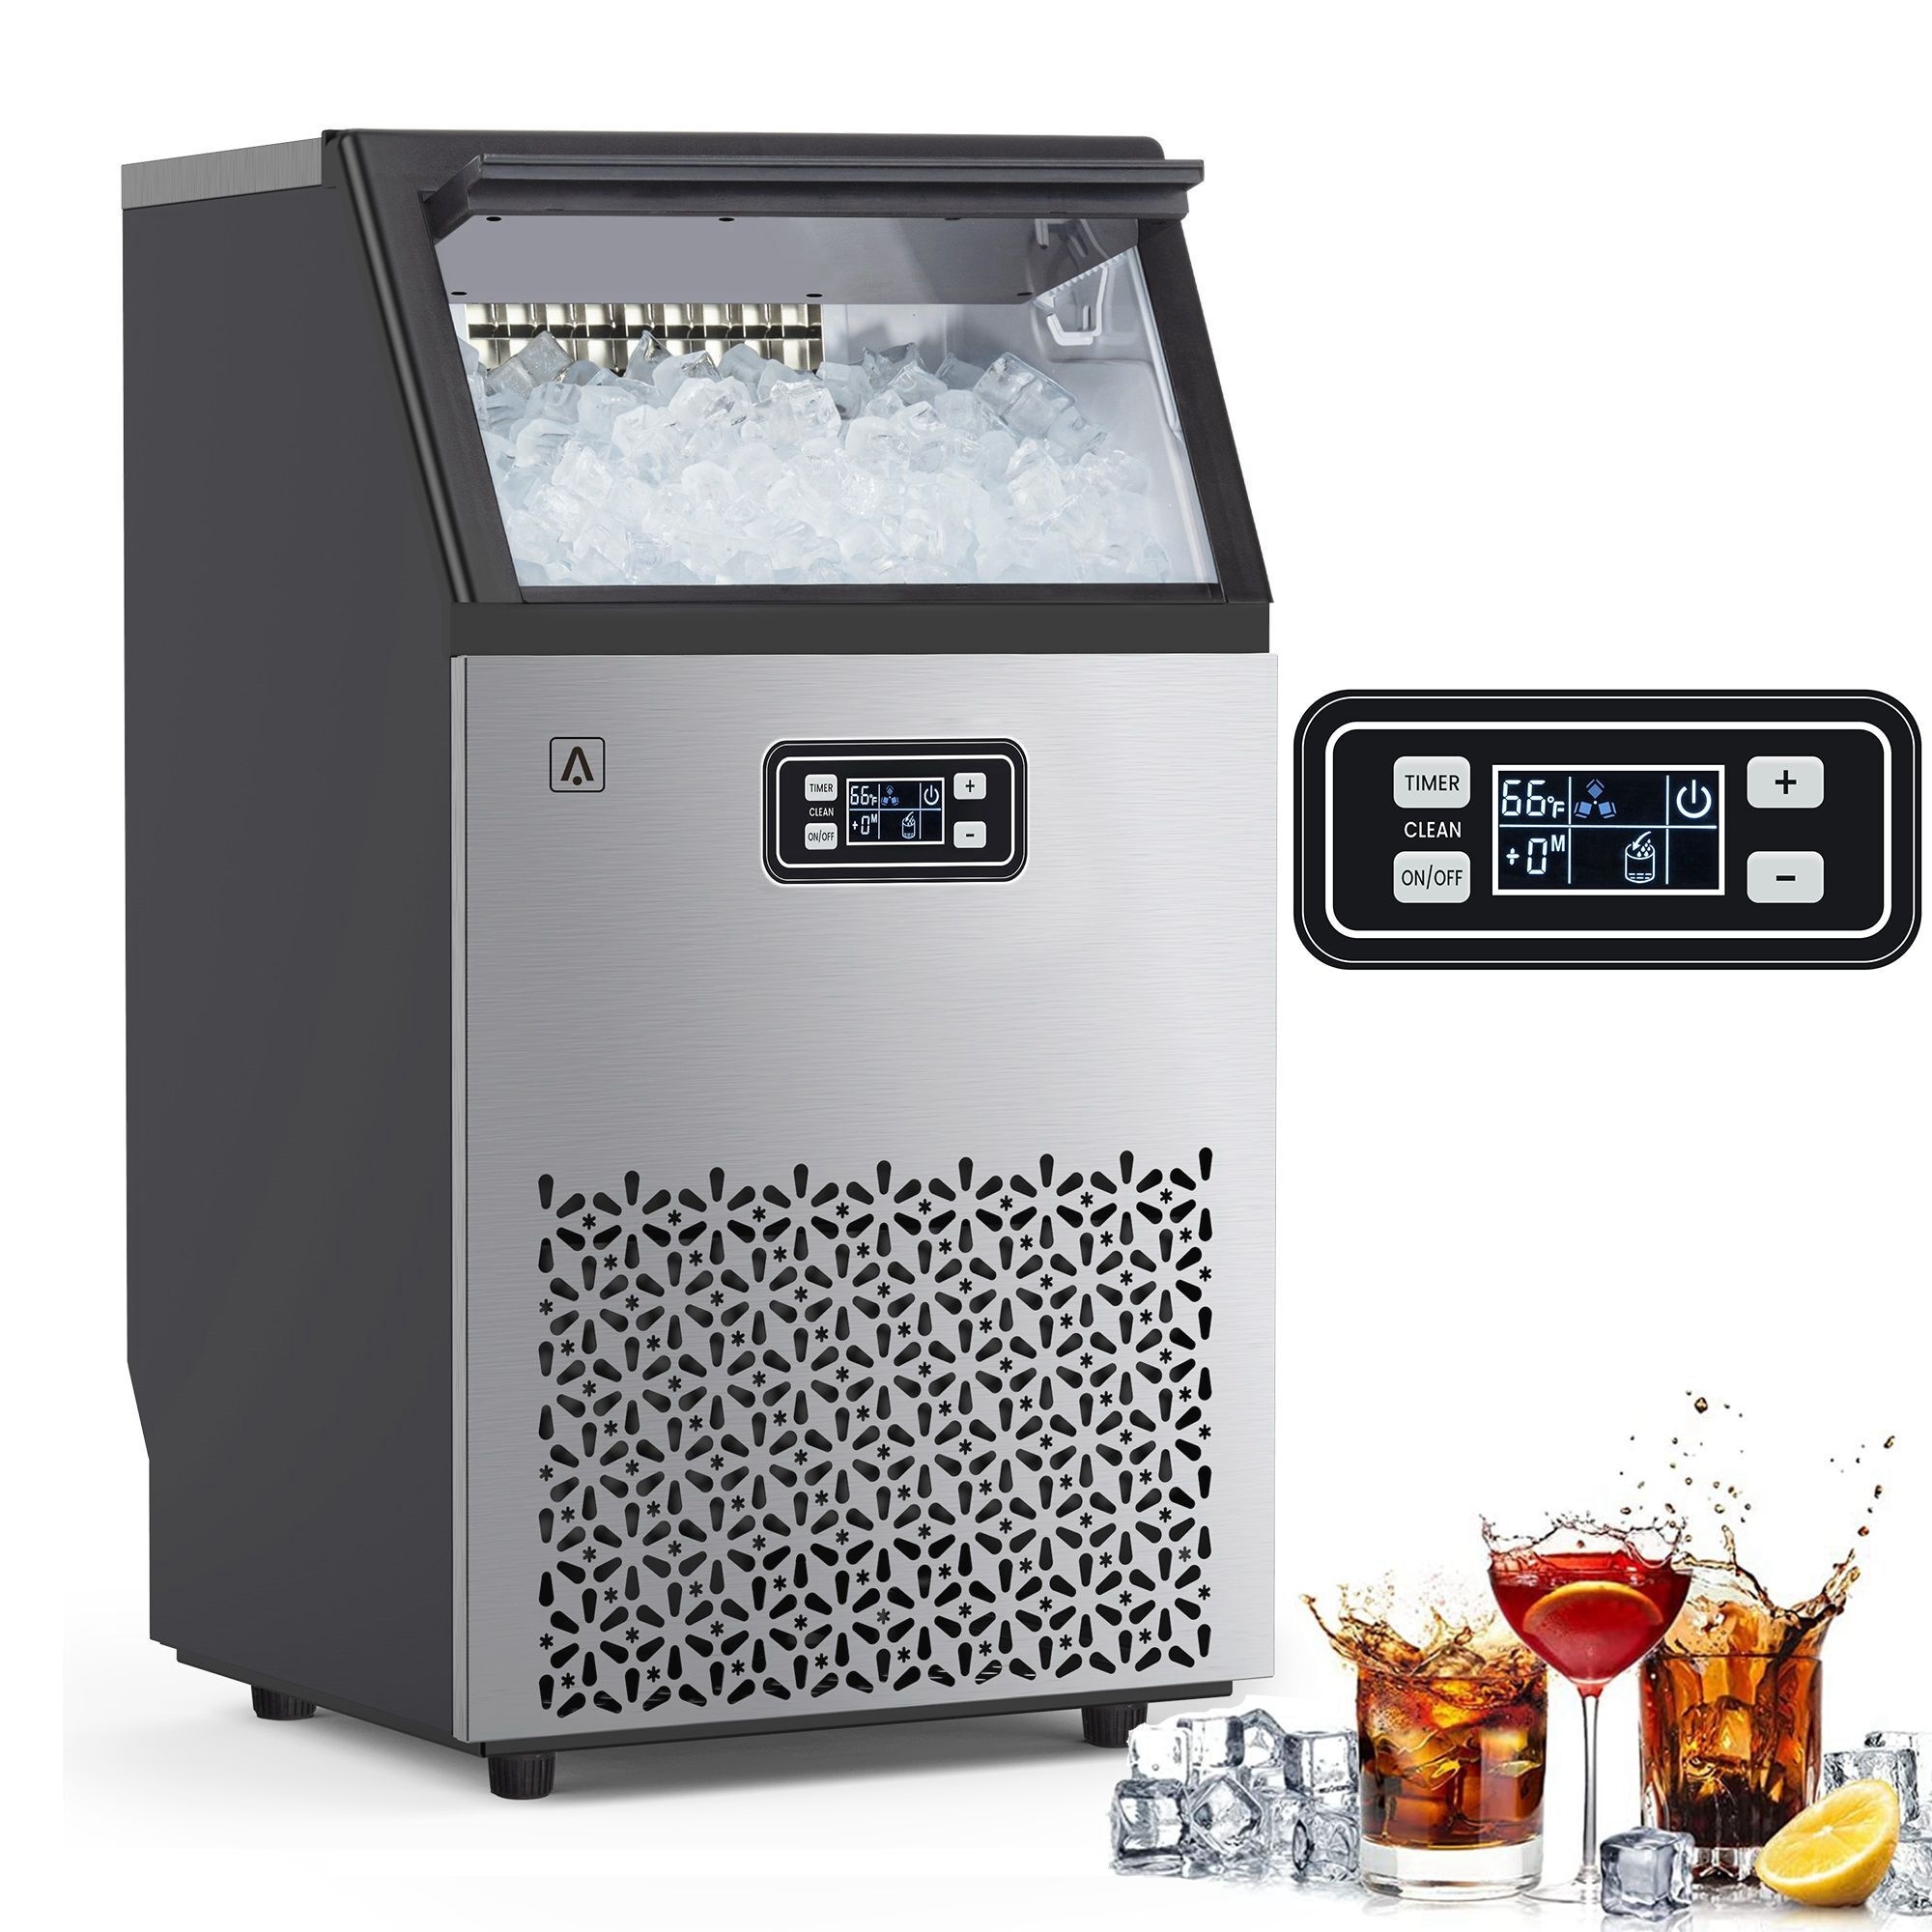 https://ak1.ostkcdn.com/images/products/is/images/direct/aeef565aef164f425977e9b6d82aa2ce8d52c8e2/Commercial-Ice-Maker-150Lbs-24H-with-33Lbs-Storage%2C-Full-Stainless-Steel-Under-Counter-Ice-Machine-for-Party-Bar-Home.jpg